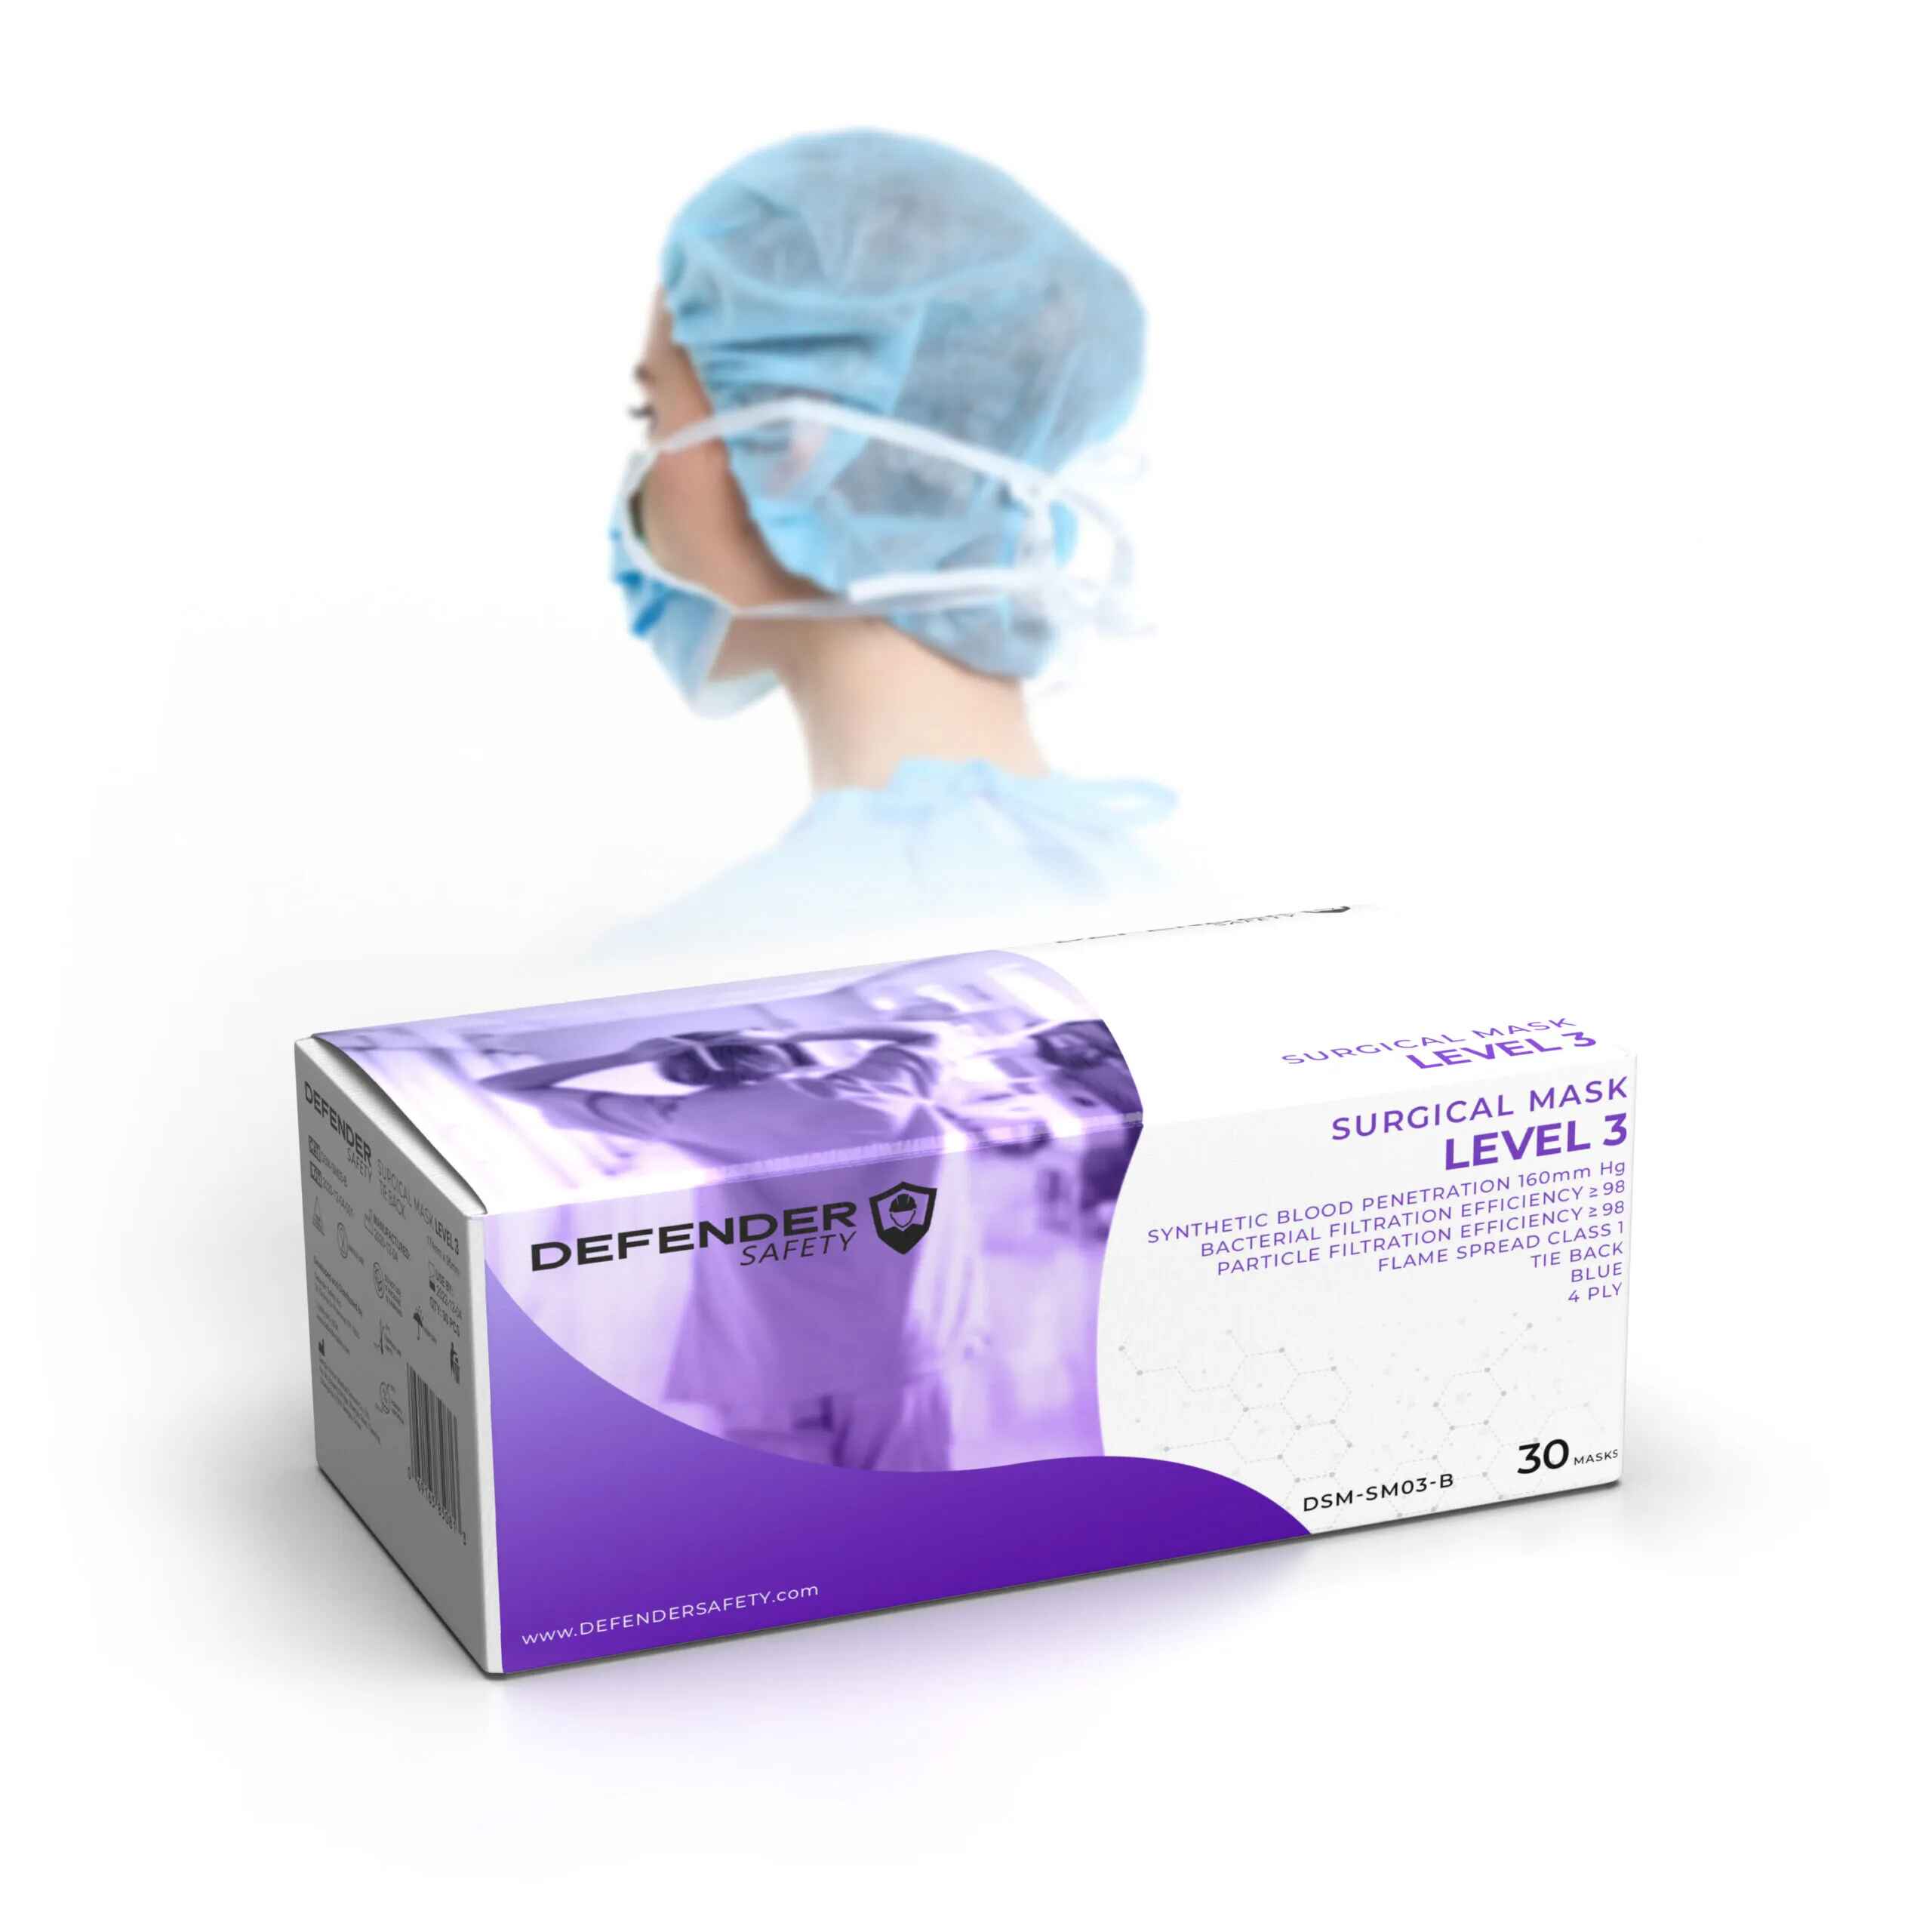 Surgical Mask w/ Ties- ASTM Level 3, 4 Layer, 99% PFE, Medical Grade, FDA 510(k) Cleared, 1200